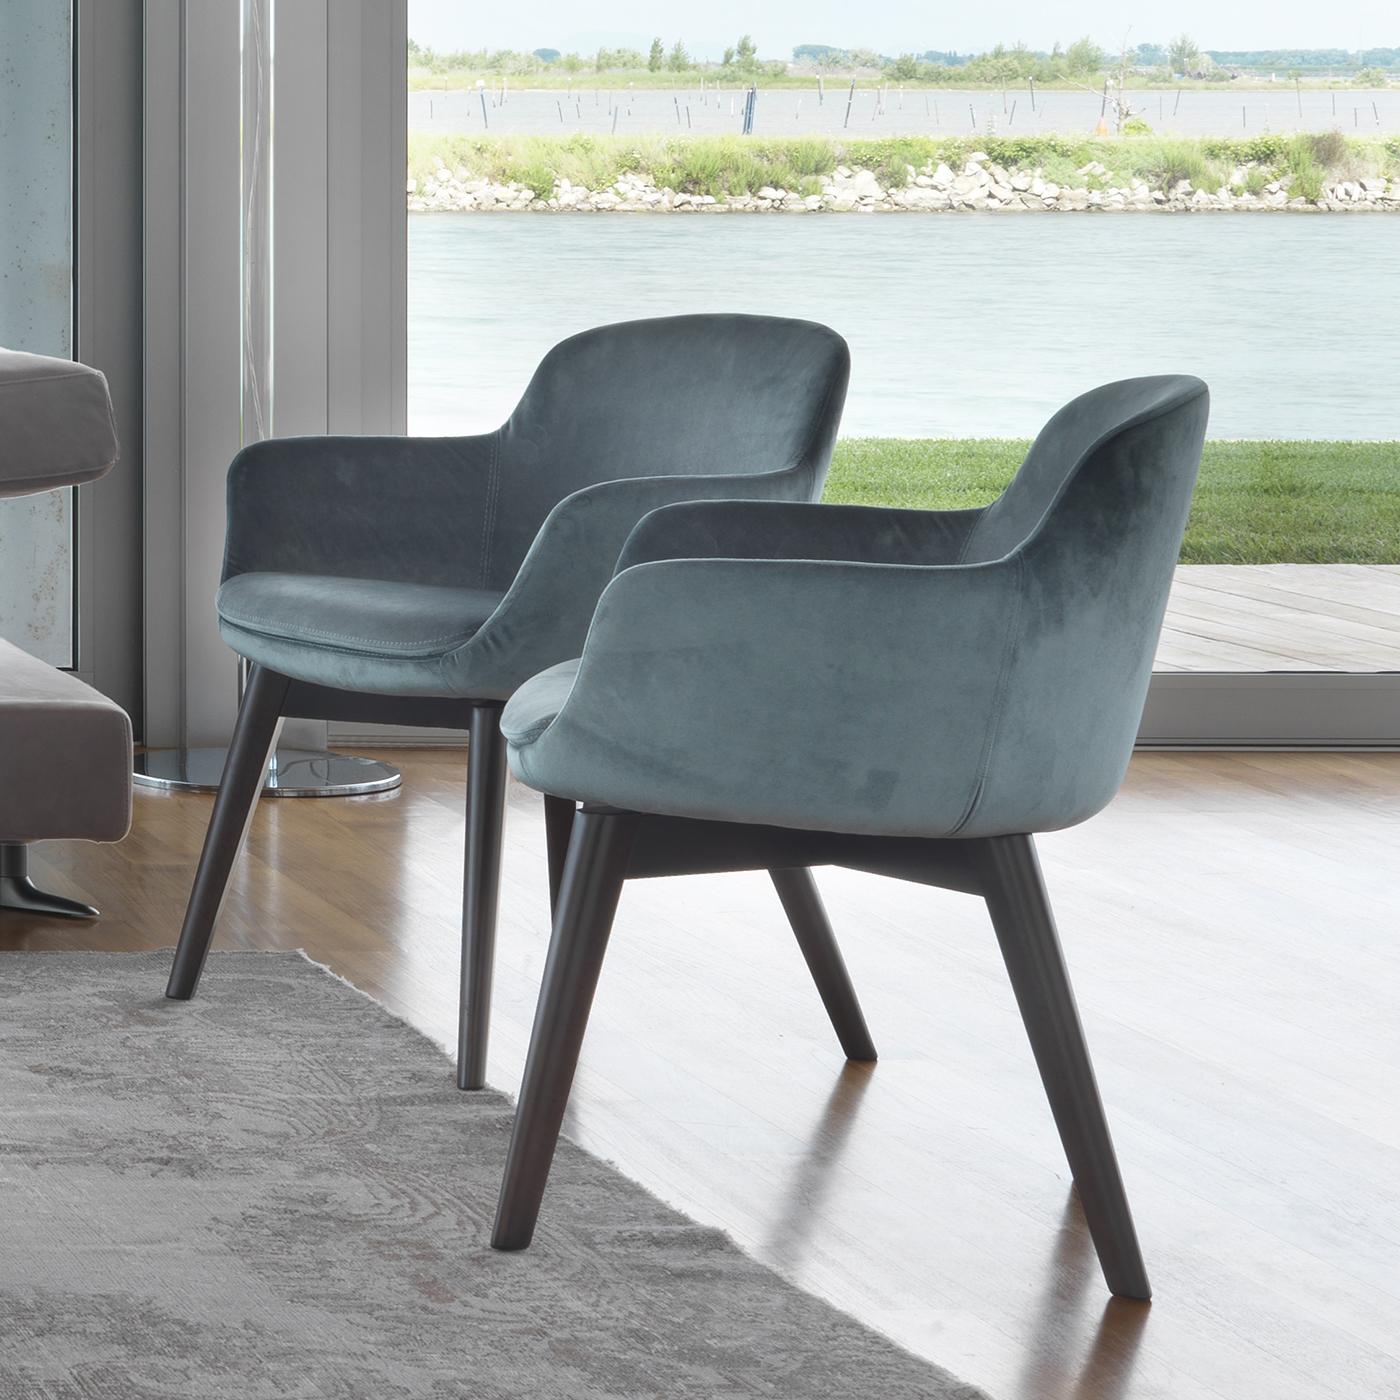 This armchair embodies the concepts of simplicity and elegance. Covered in aquamarine velvet, its curved, sinuous lines highlight its design. It features a steel structure, cold-moulded polyurethane foam and wooden inserts. Its beechwood legs can be